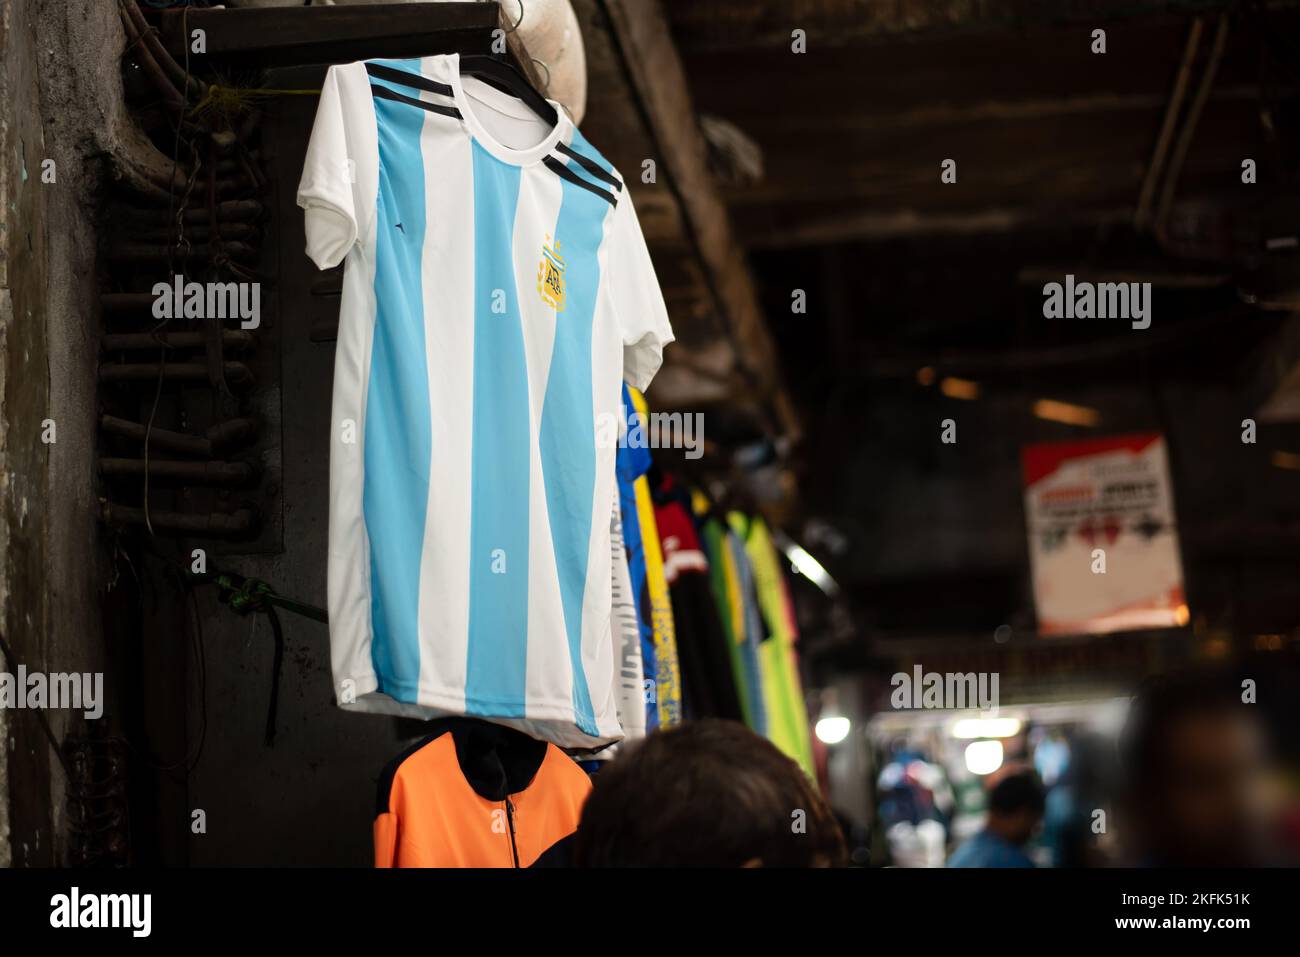 Argentina soccer jersey is hanging in a retail store Stock Photo